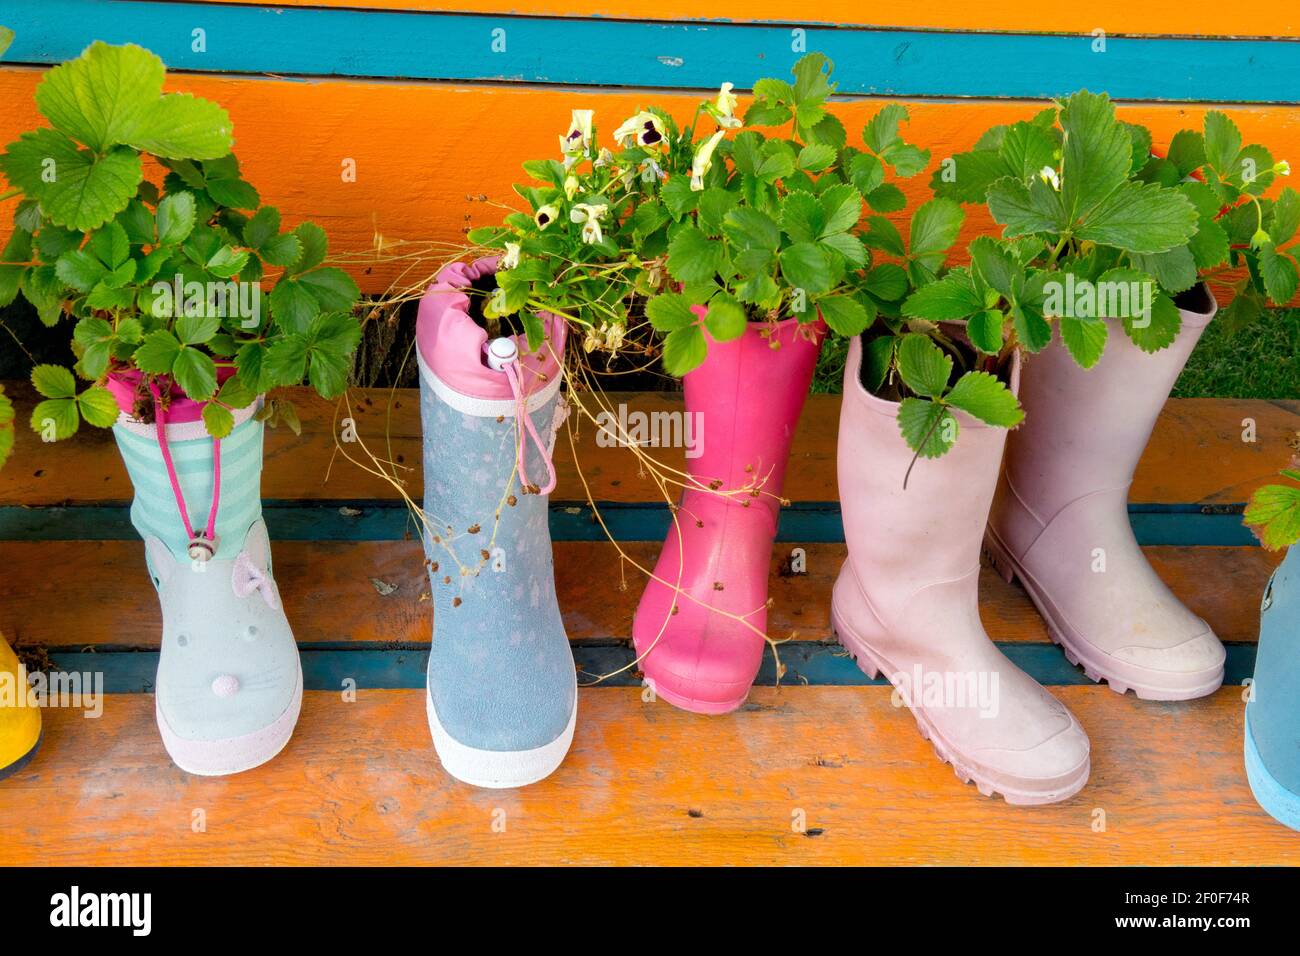 Strawberries Plant growing in rubber Wellington boots, shoes like alternative pots Flowers planted in Boots Stock Photo